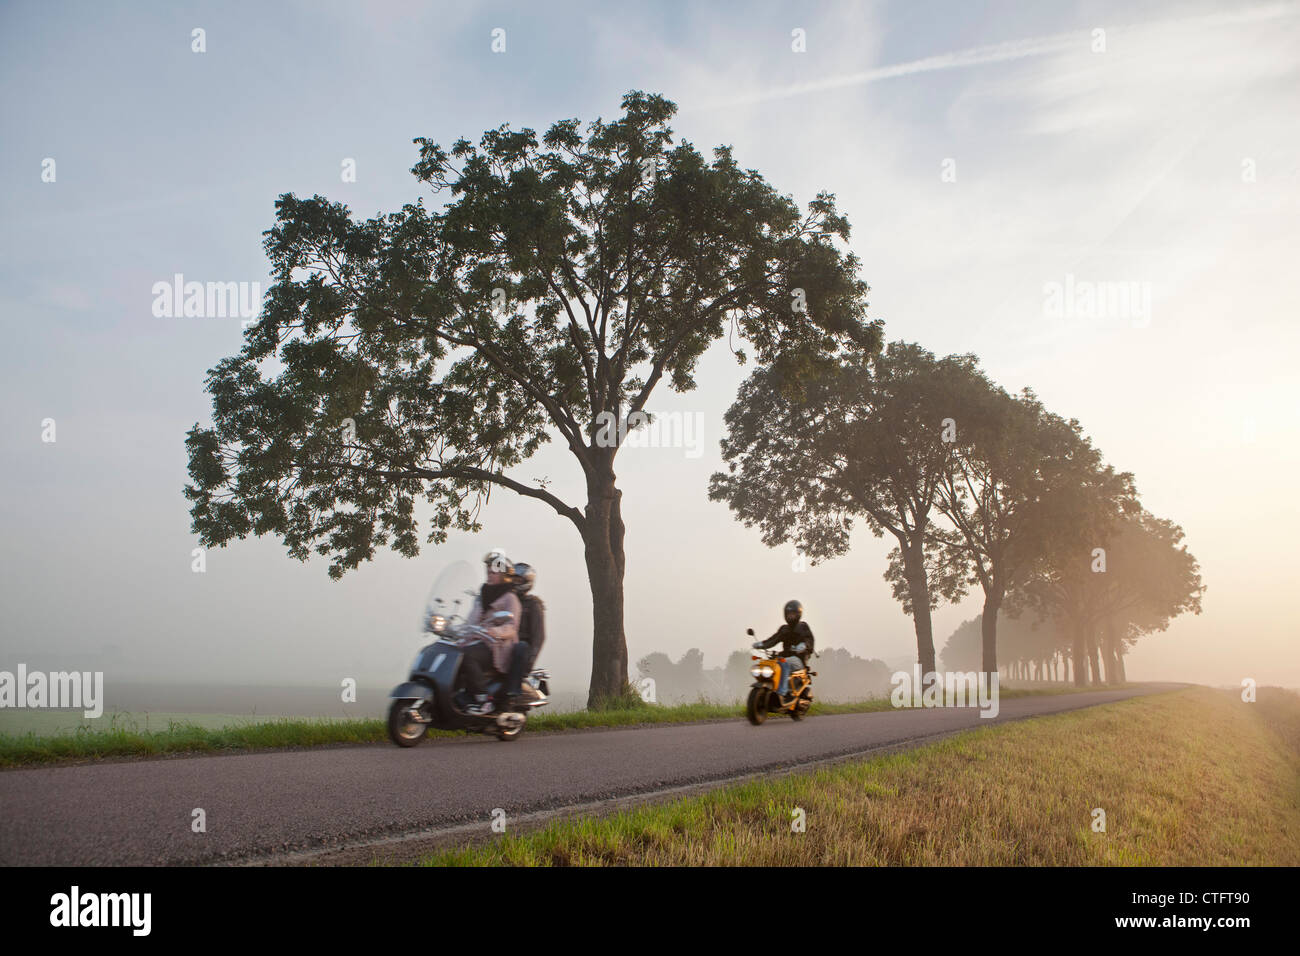 The Netherlands, Zuid Beemster, Beemster Polder, Trees and road on dike, which encircles the polder. Young people on motorcycles Stock Photo